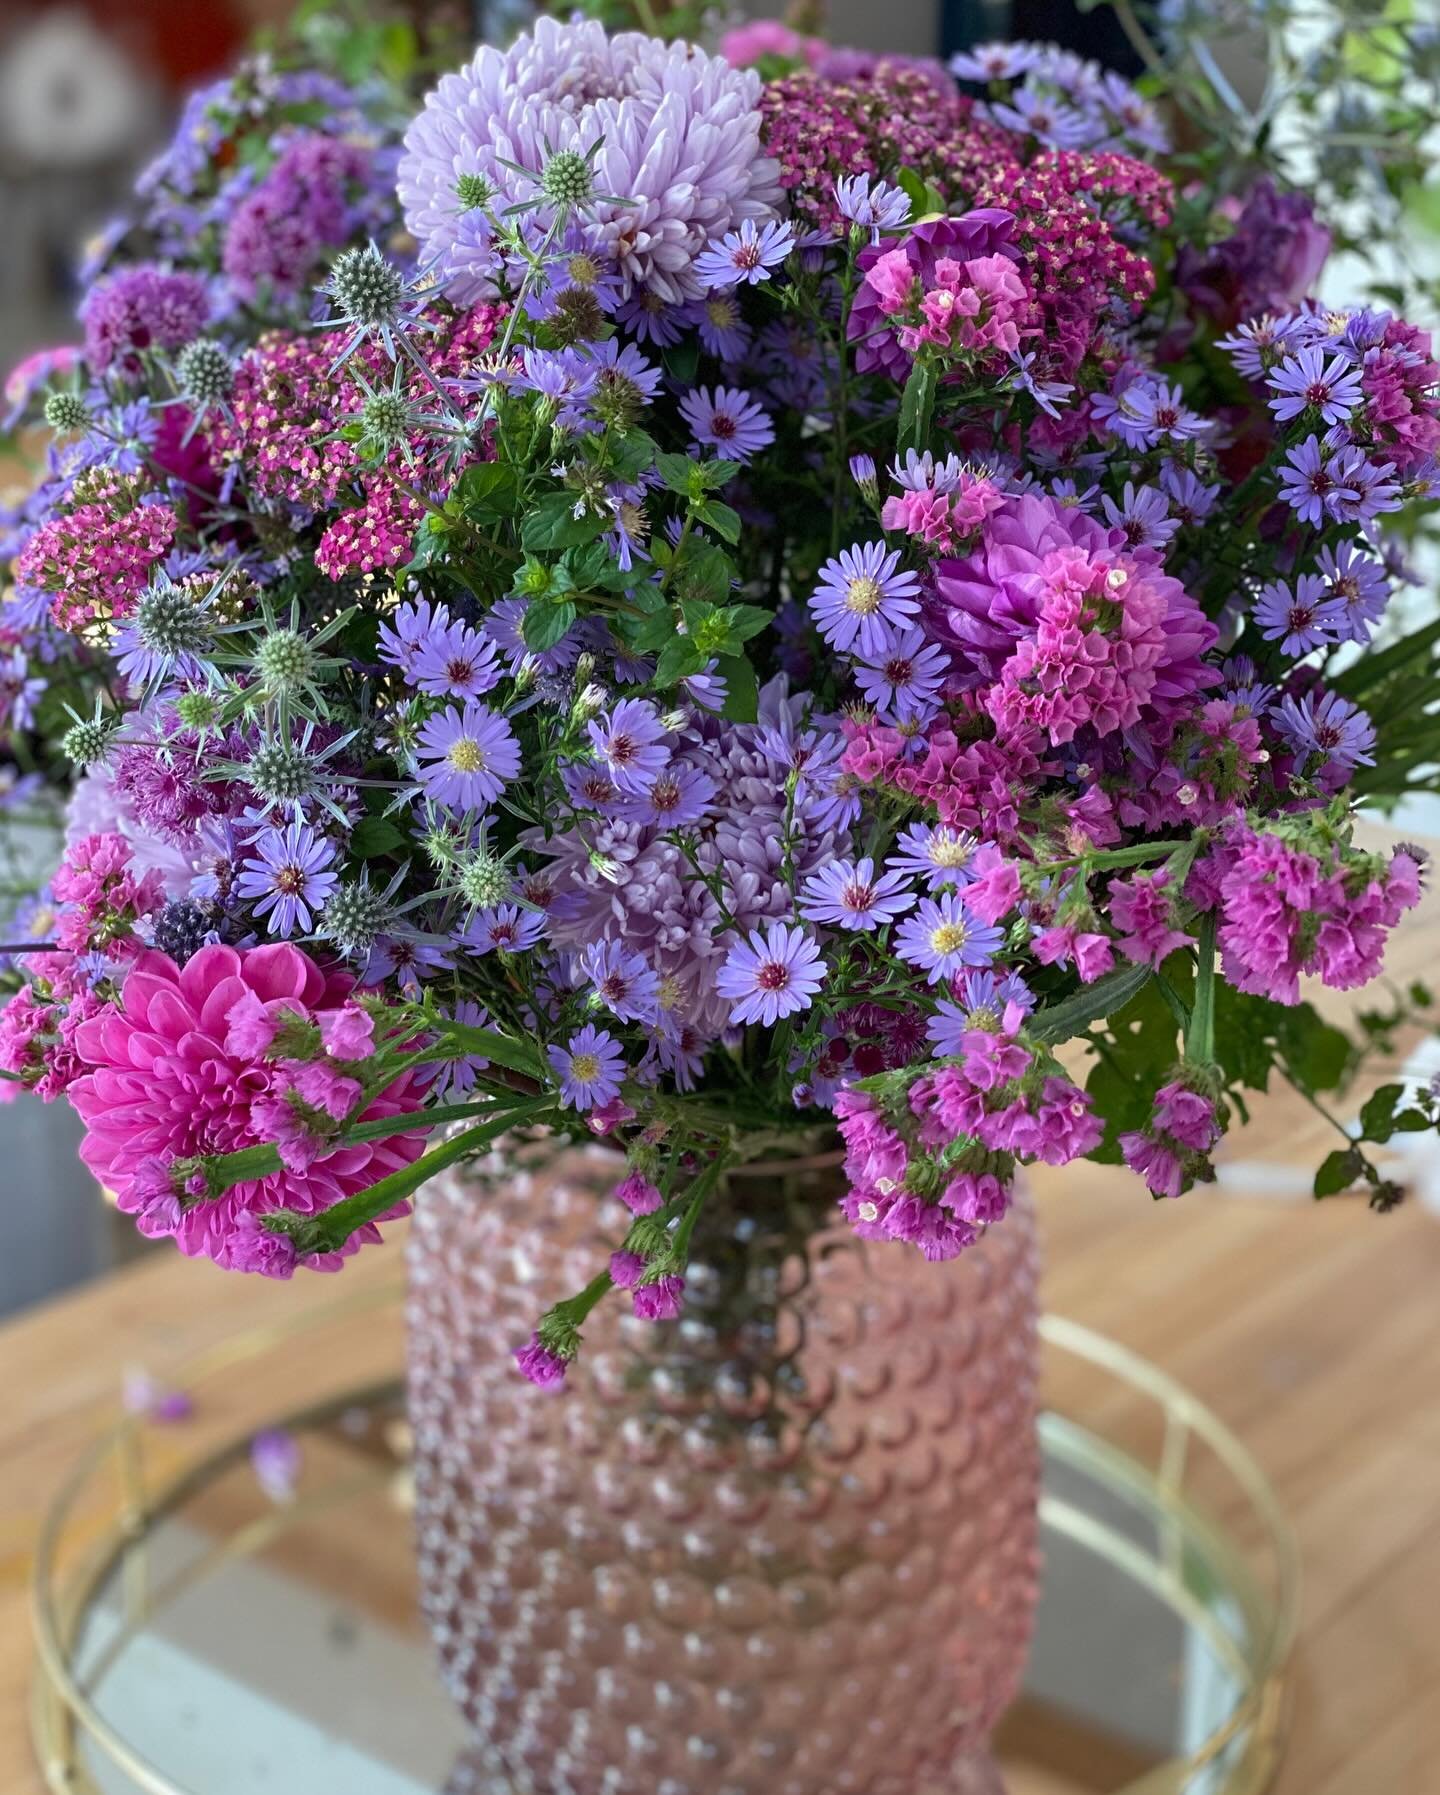 The long weekend may be over but we&rsquo;ve been promised sunshine and it&rsquo;s a short week ahead so no complaints over here! Here&rsquo;s a riot of summer colour to get your day off to a good start 🌸 💜
.
.
#springflowers #fromthegarden #artisa